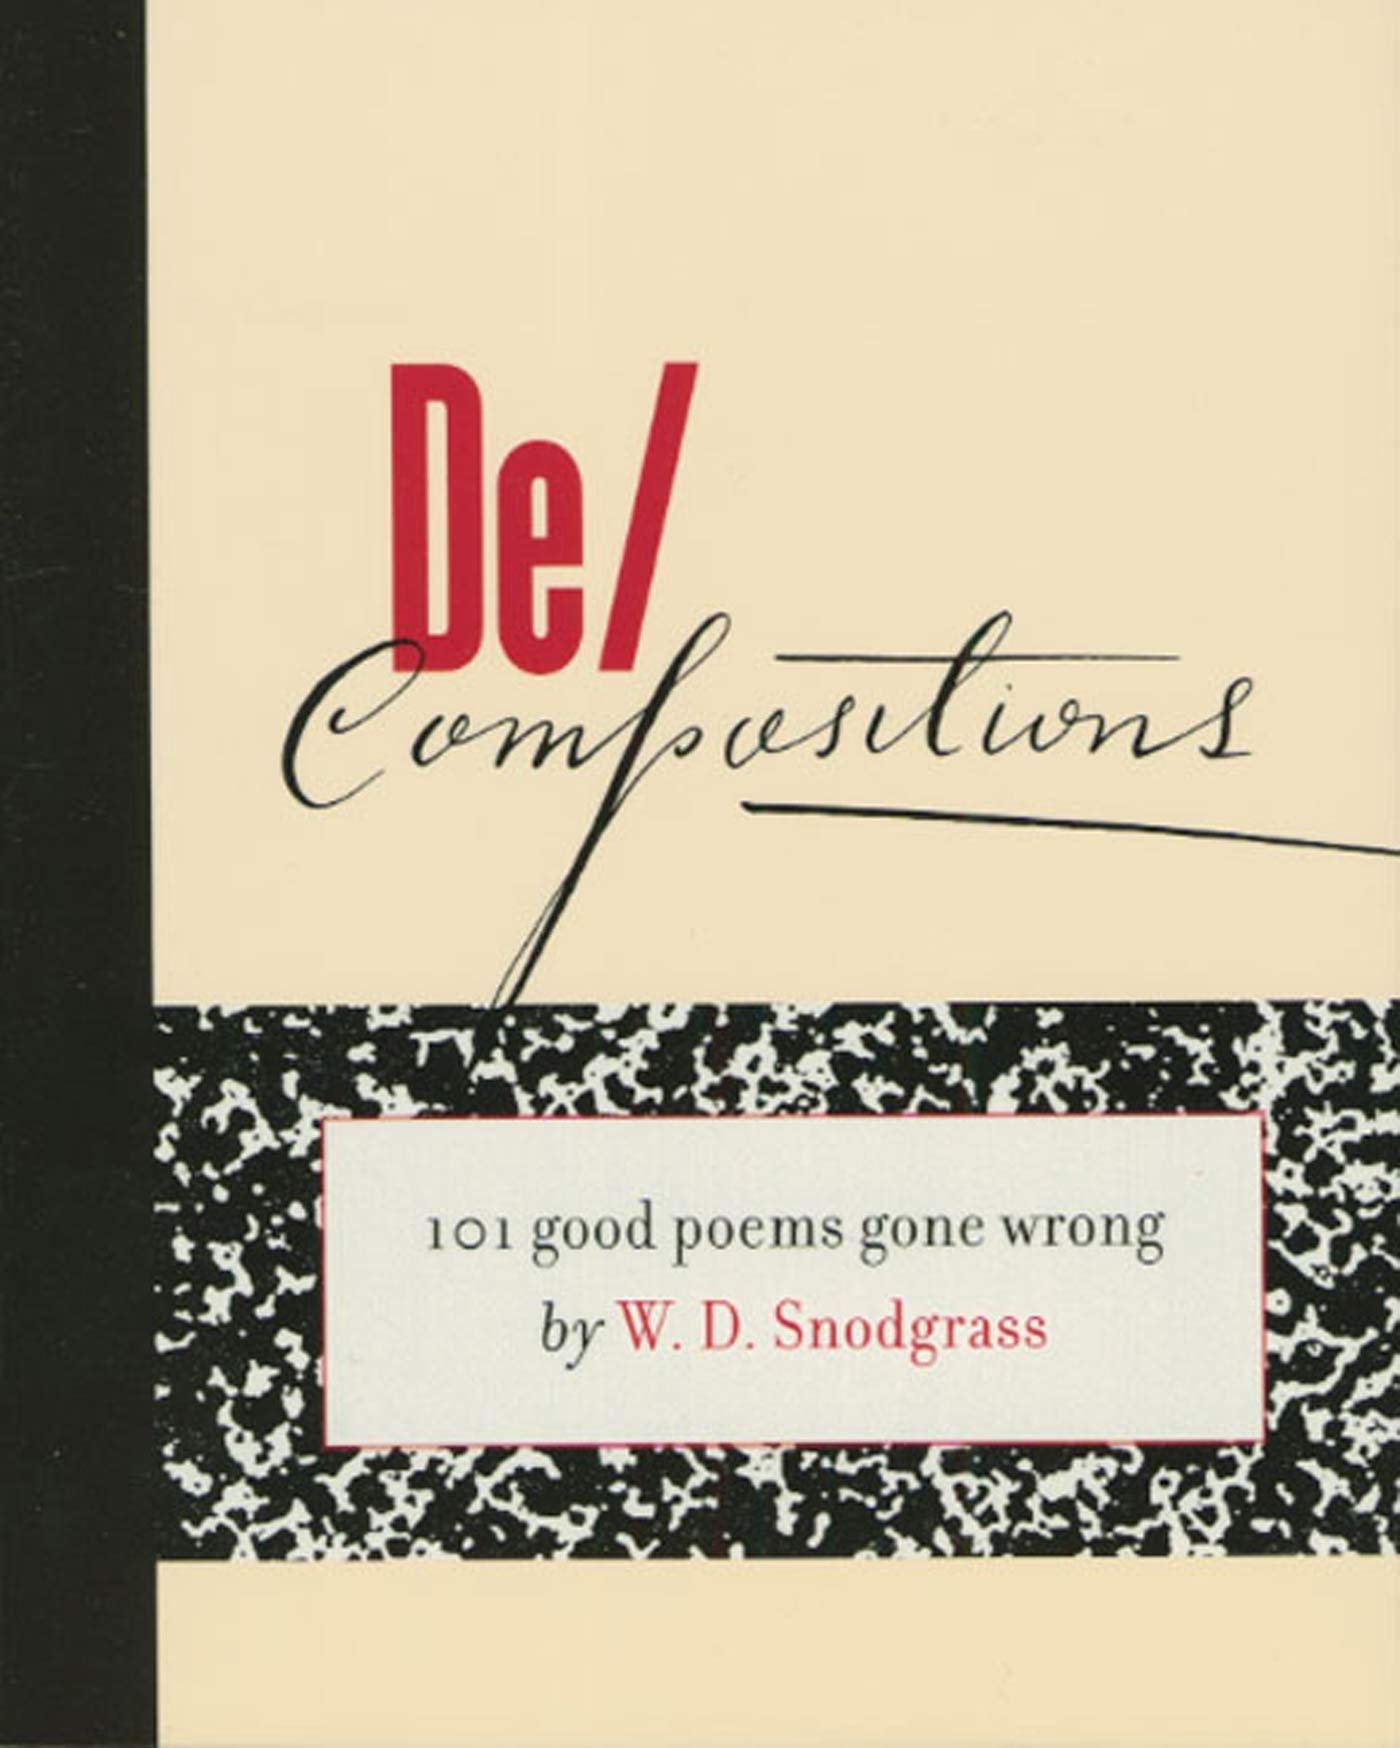 De/Compositions: 101 Good Poems Gone Wrong